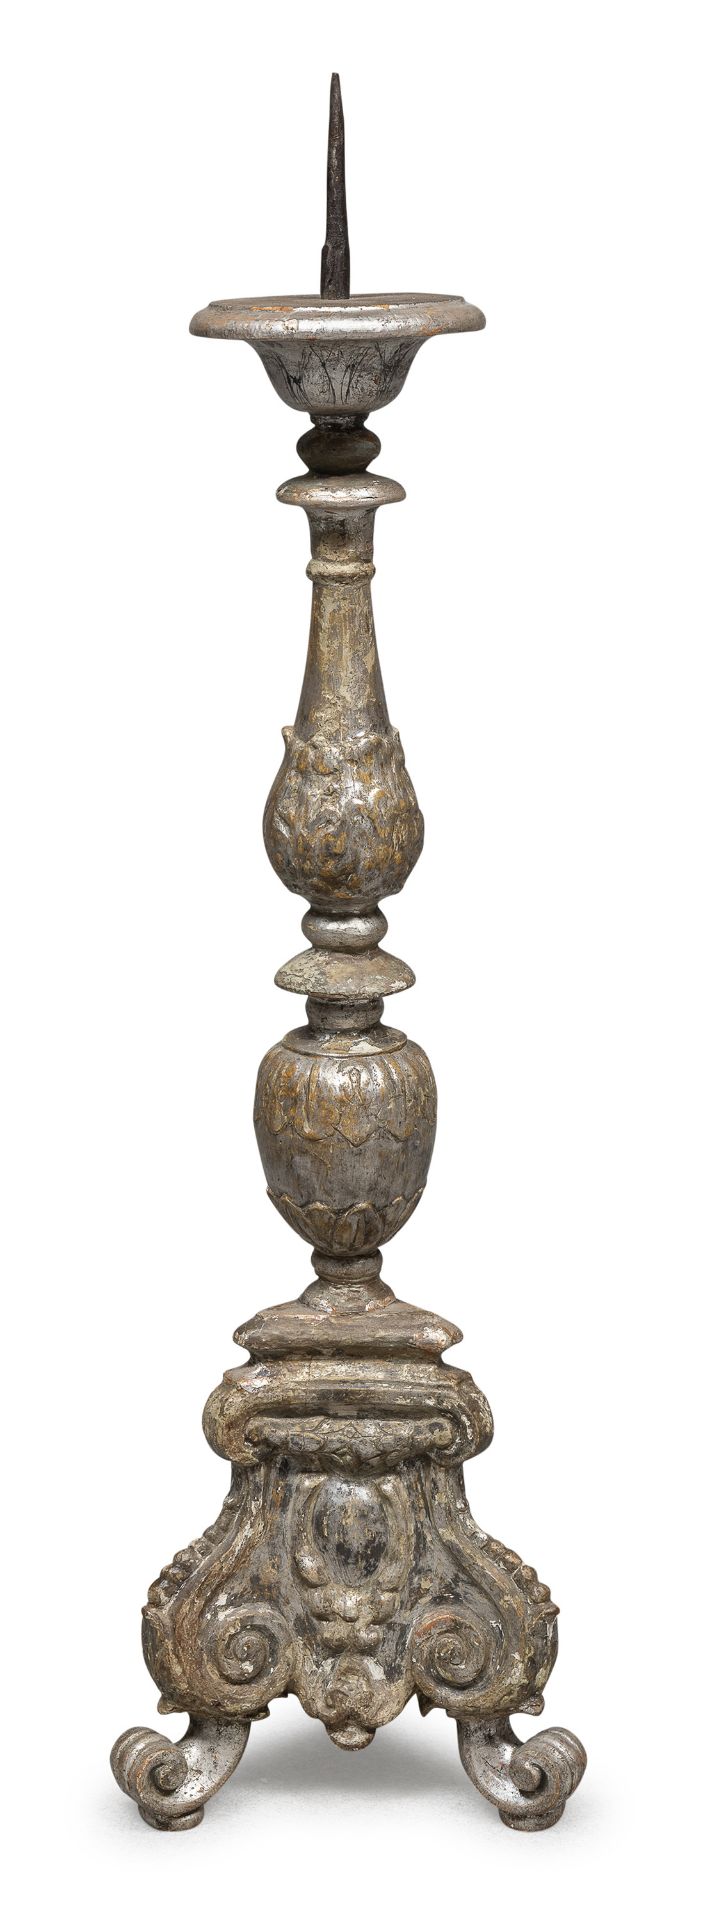 SILVER-PLATED WOOD CANDLESTICK 18TH CENTURY